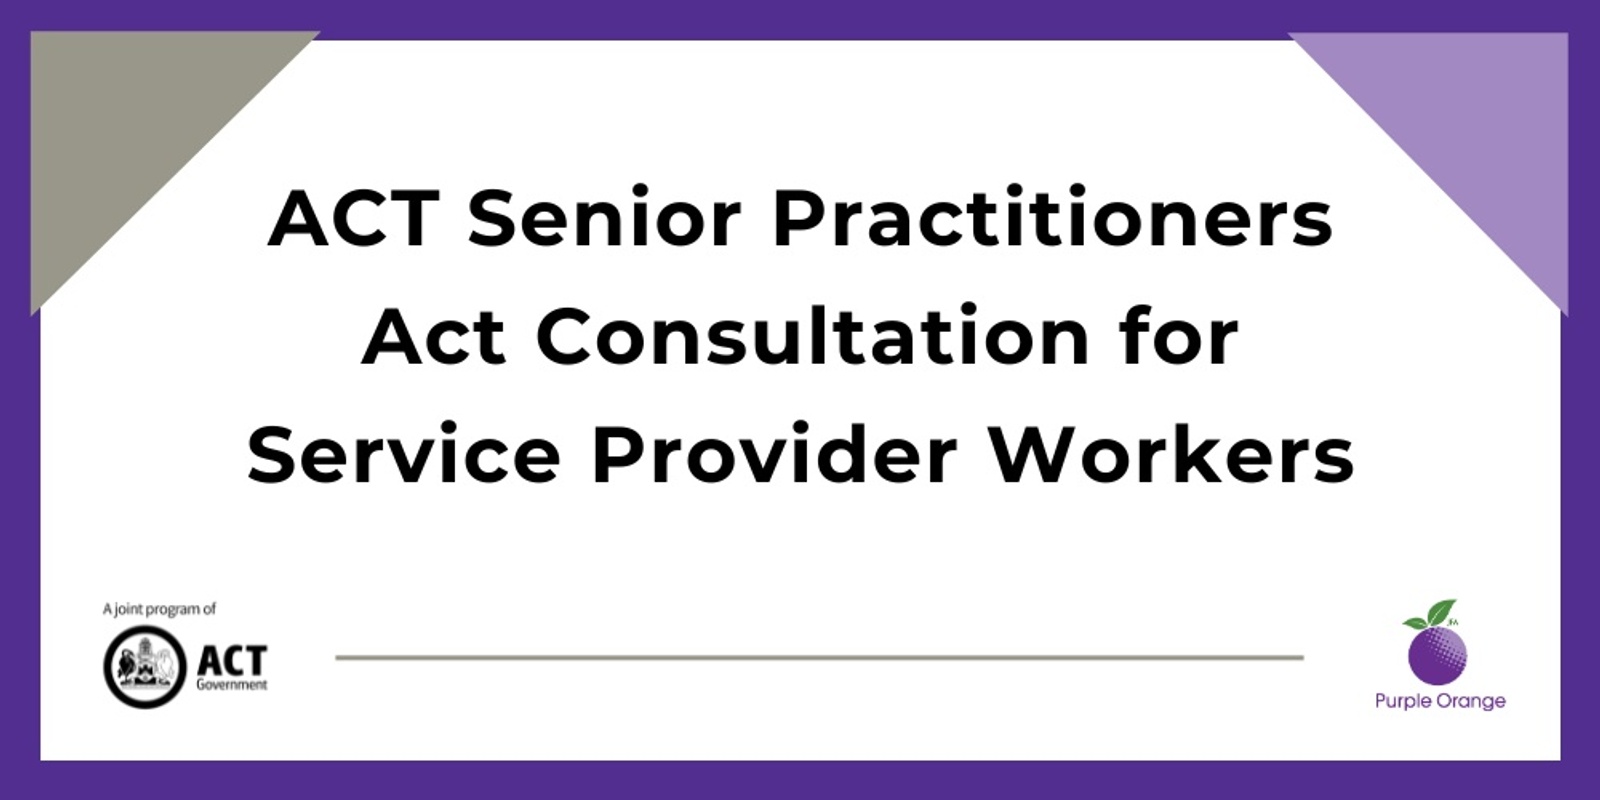 Banner image for ACT Senior Practitioner Act Consultation for Service Provider Workers